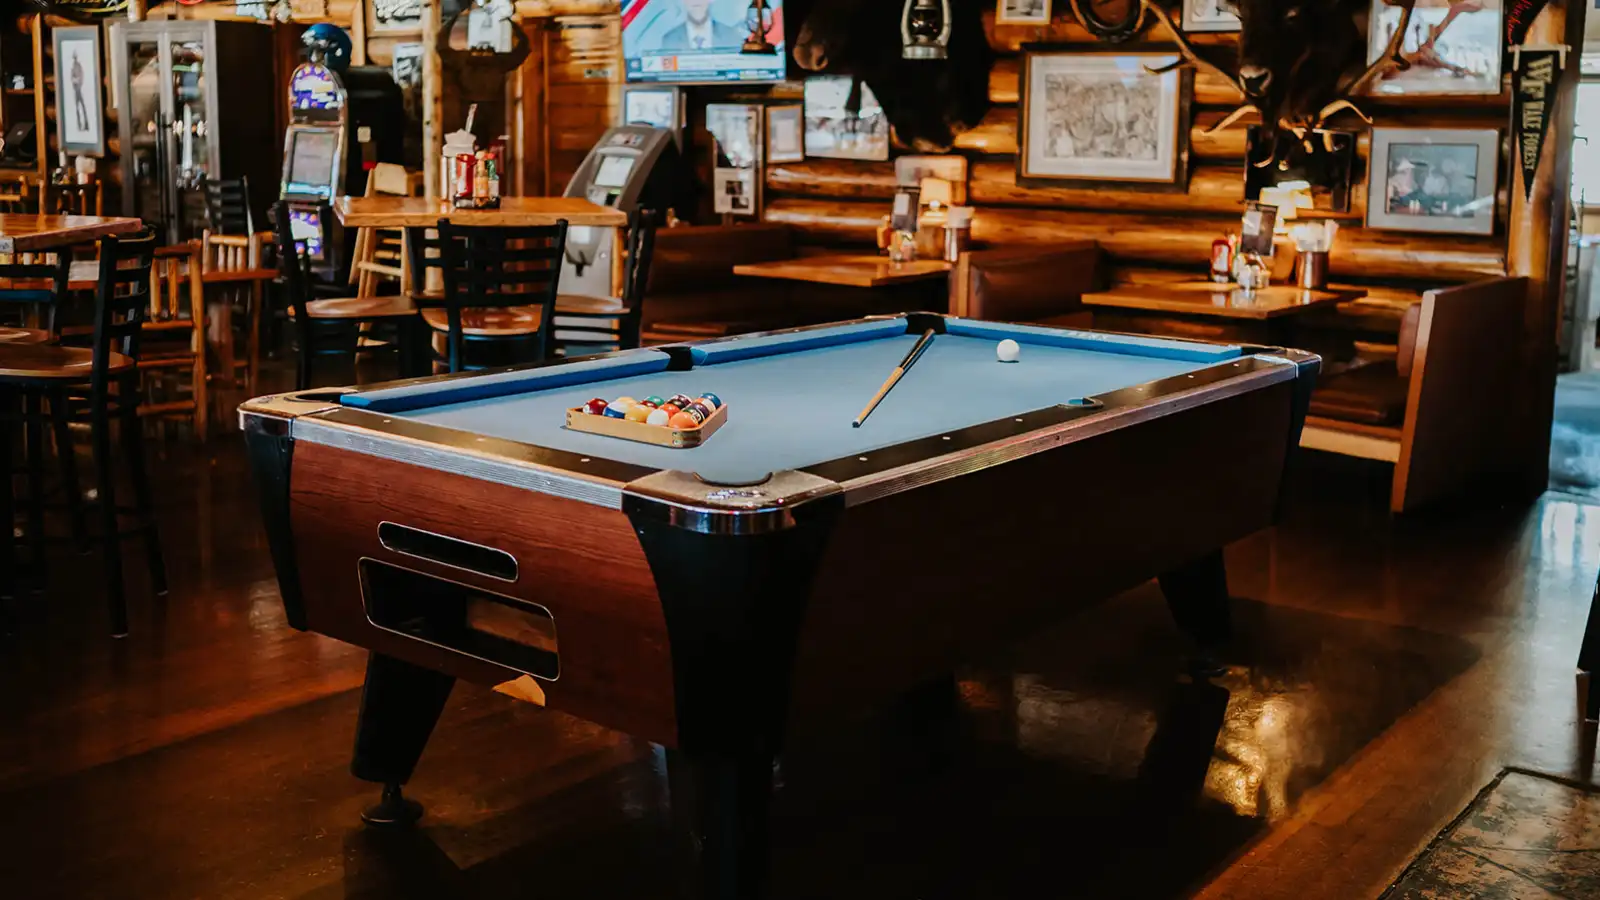 A pool cue and pool balls sit on top of the pool table surrounded by tables and booths inside the Corral Bar and Steakhouse.